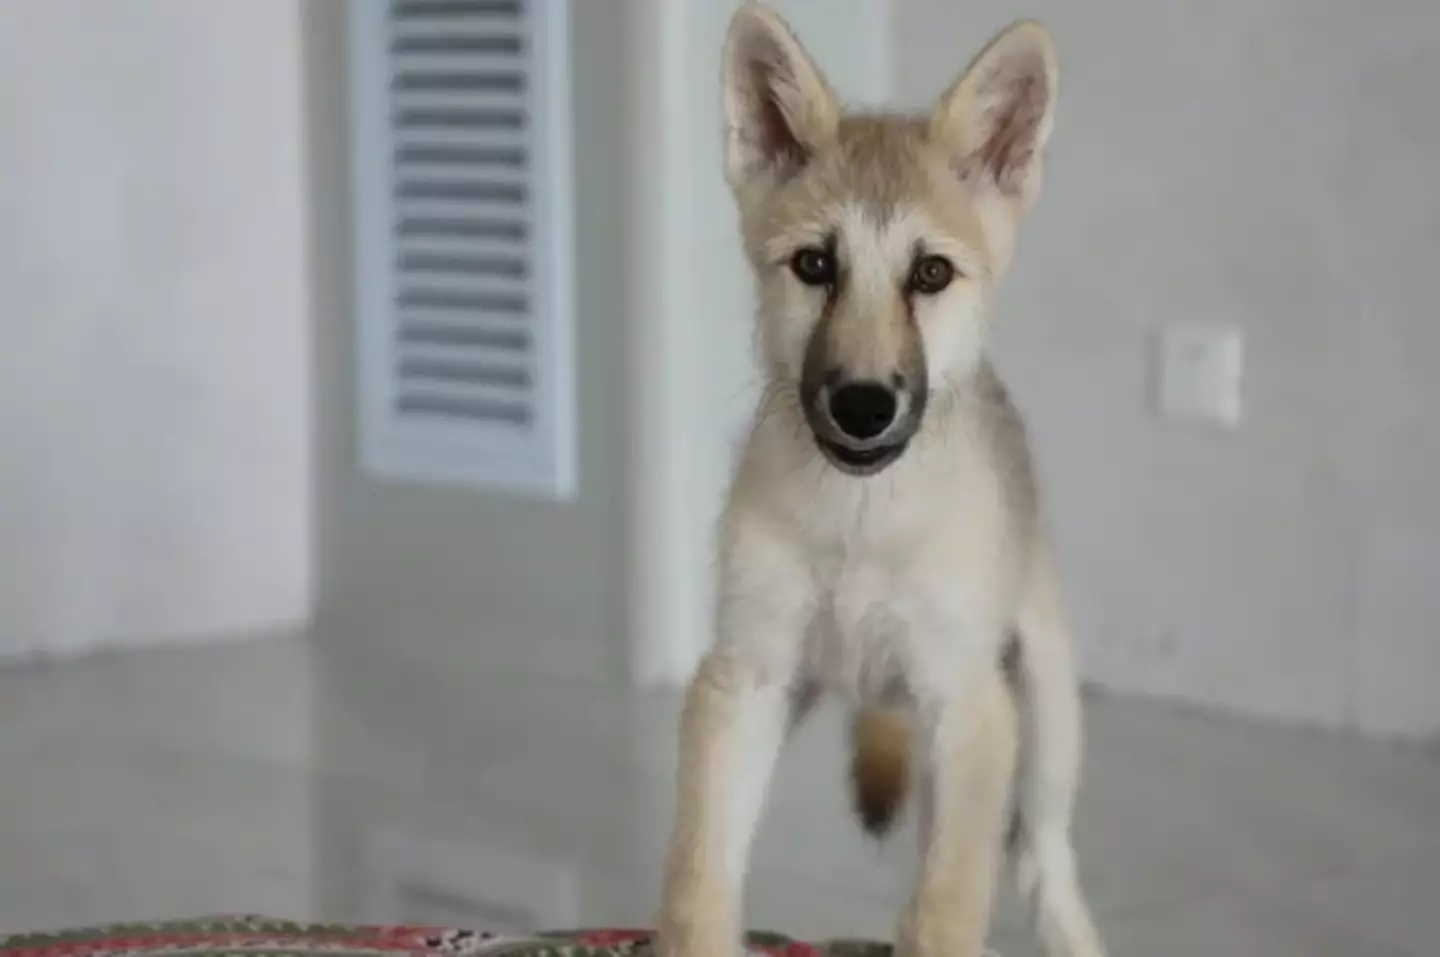 A Beijing-based genetics company has successfully cloned a (very adorable) Arctic wolf pup.